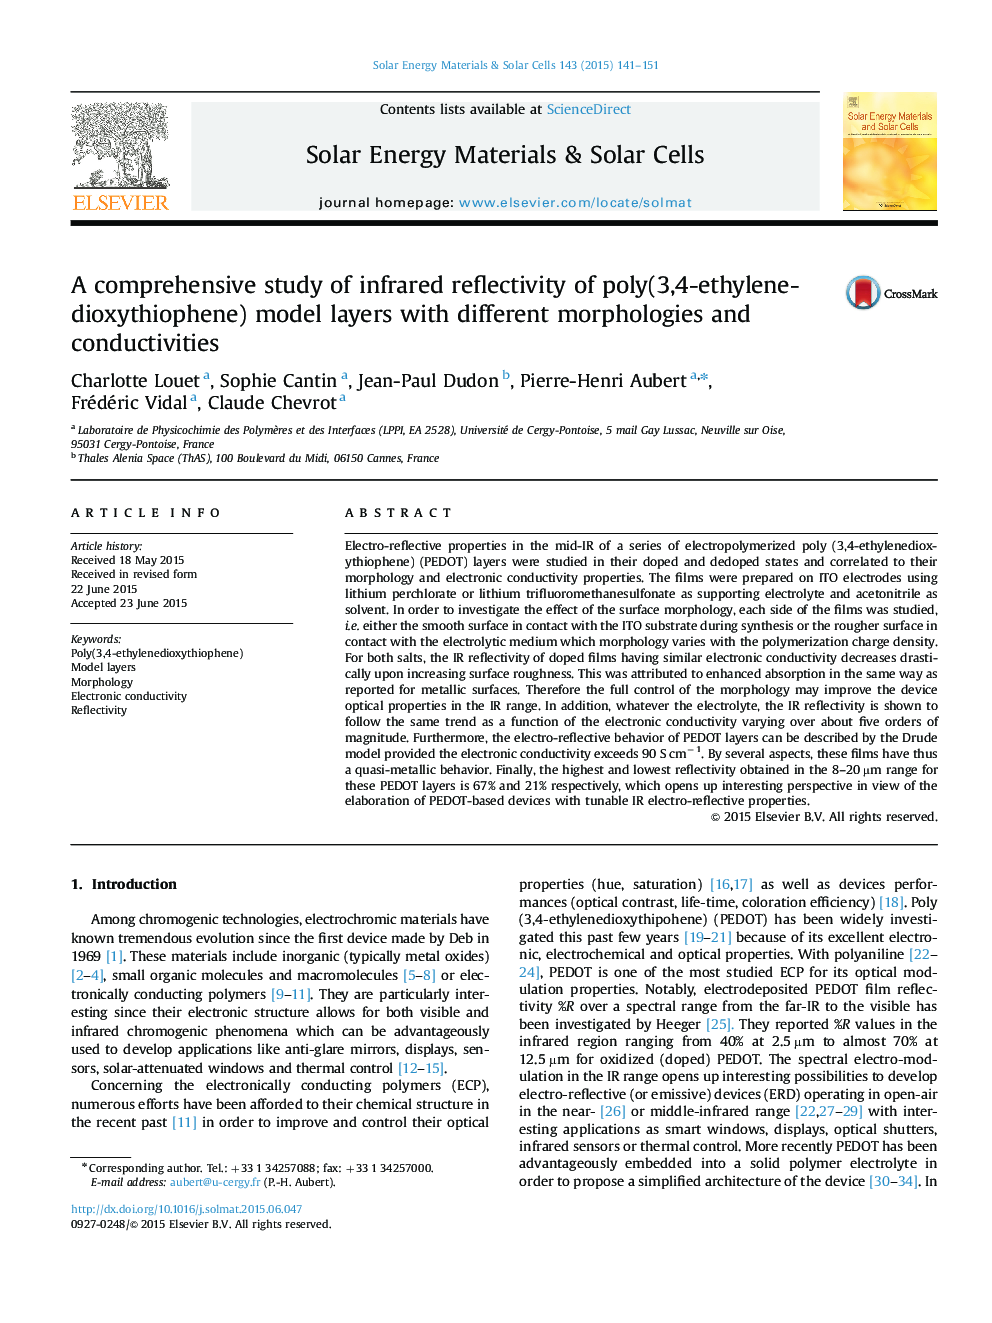 A comprehensive study of infrared reflectivity of poly(3,4-ethylenedioxythiophene) model layers with different morphologies and conductivities